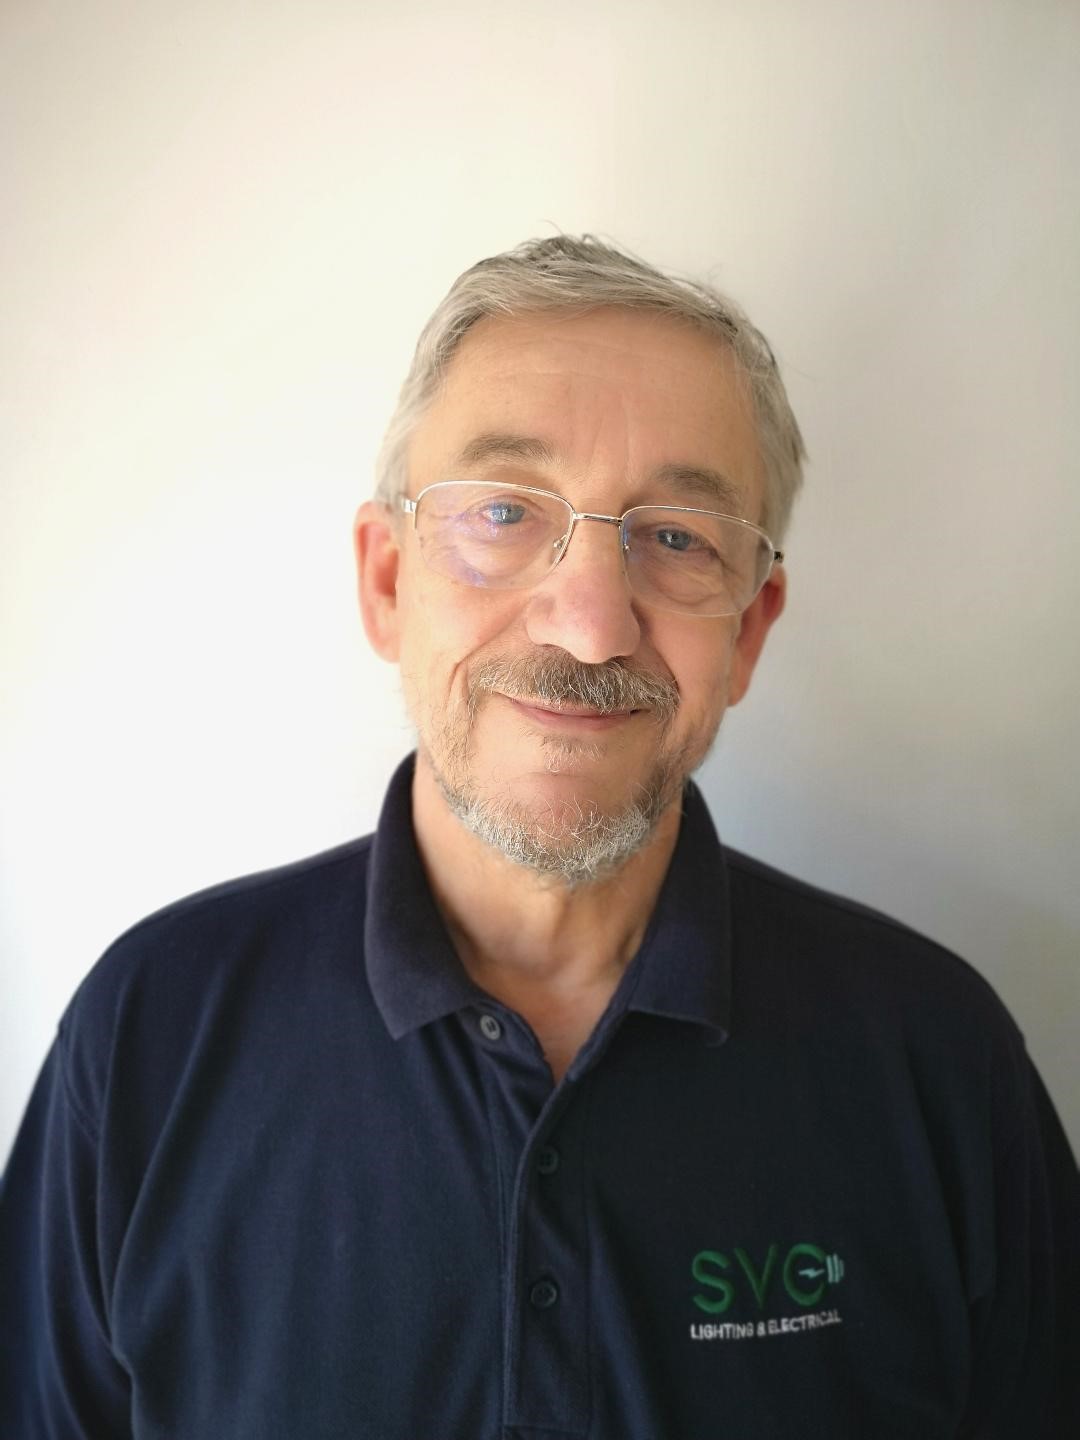 Image of man with greying hair wearing a navy polo shirt